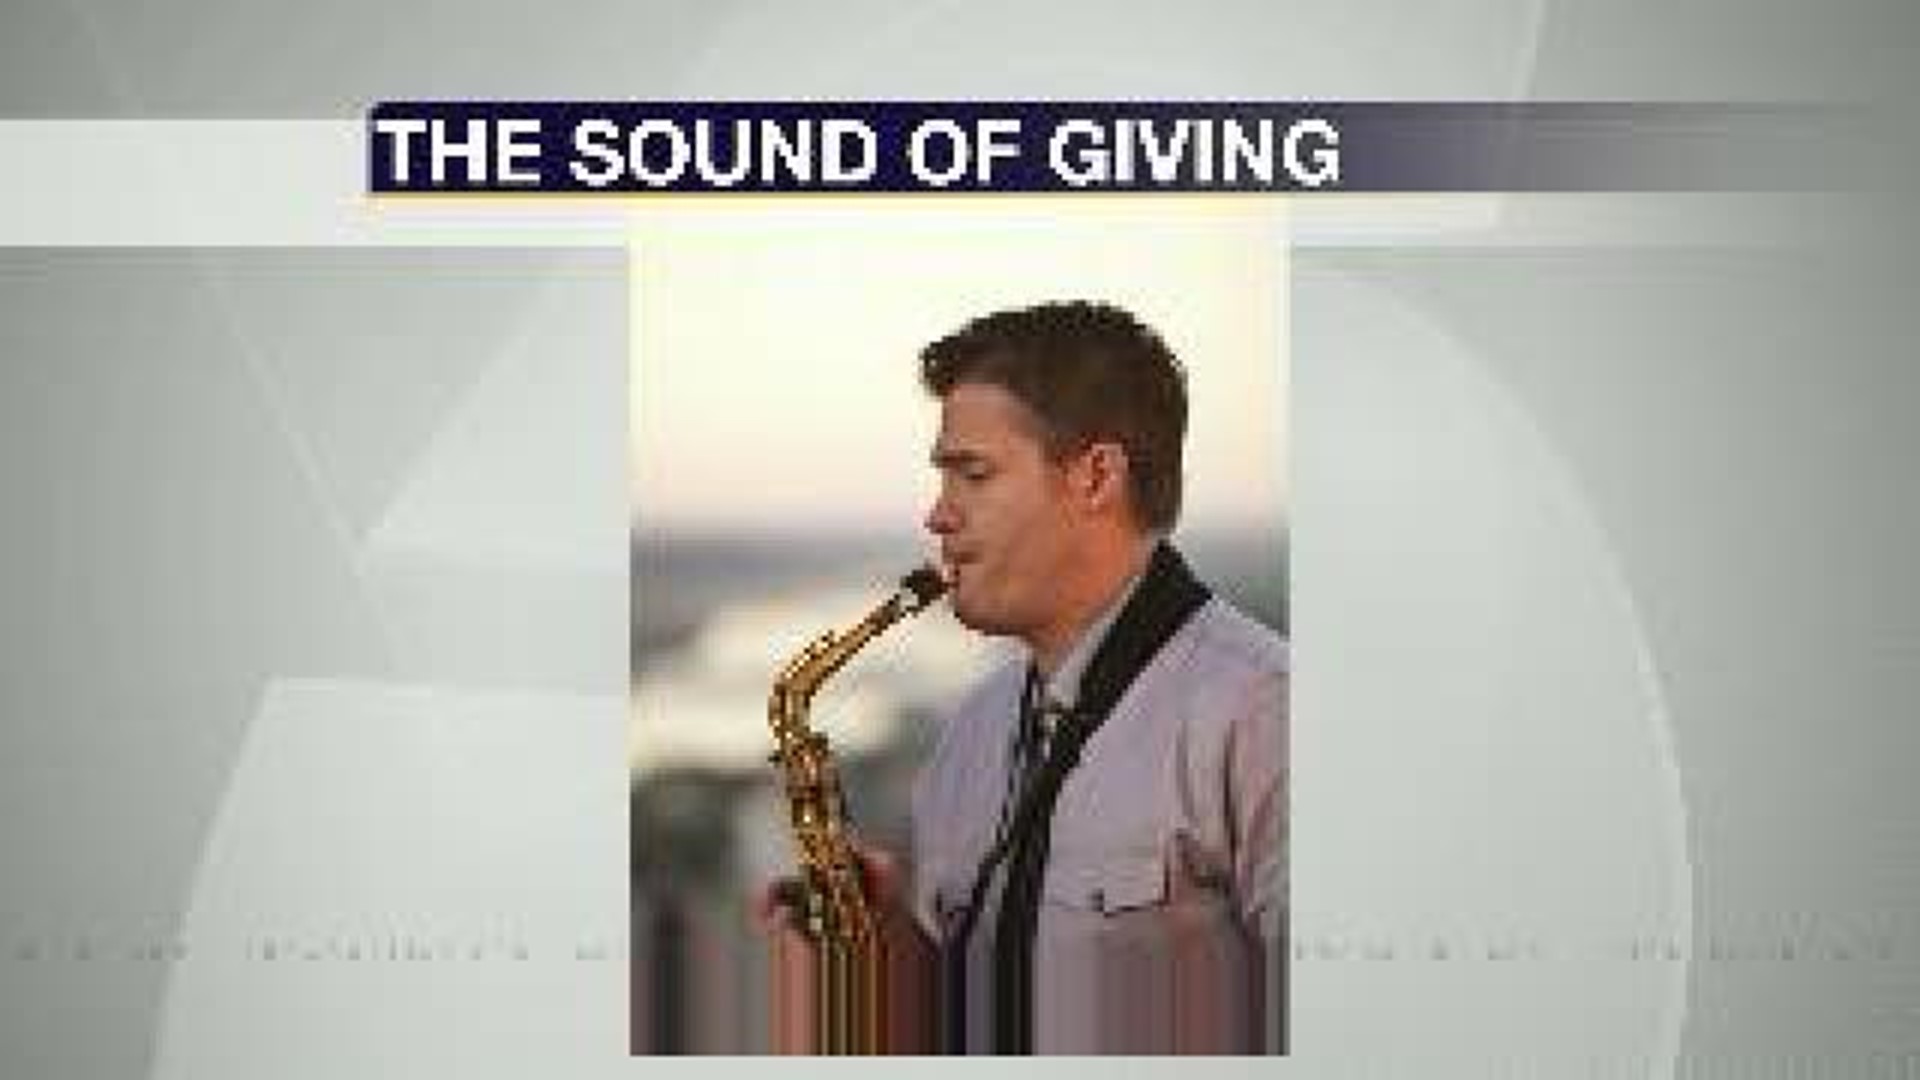 The Sound of Giving